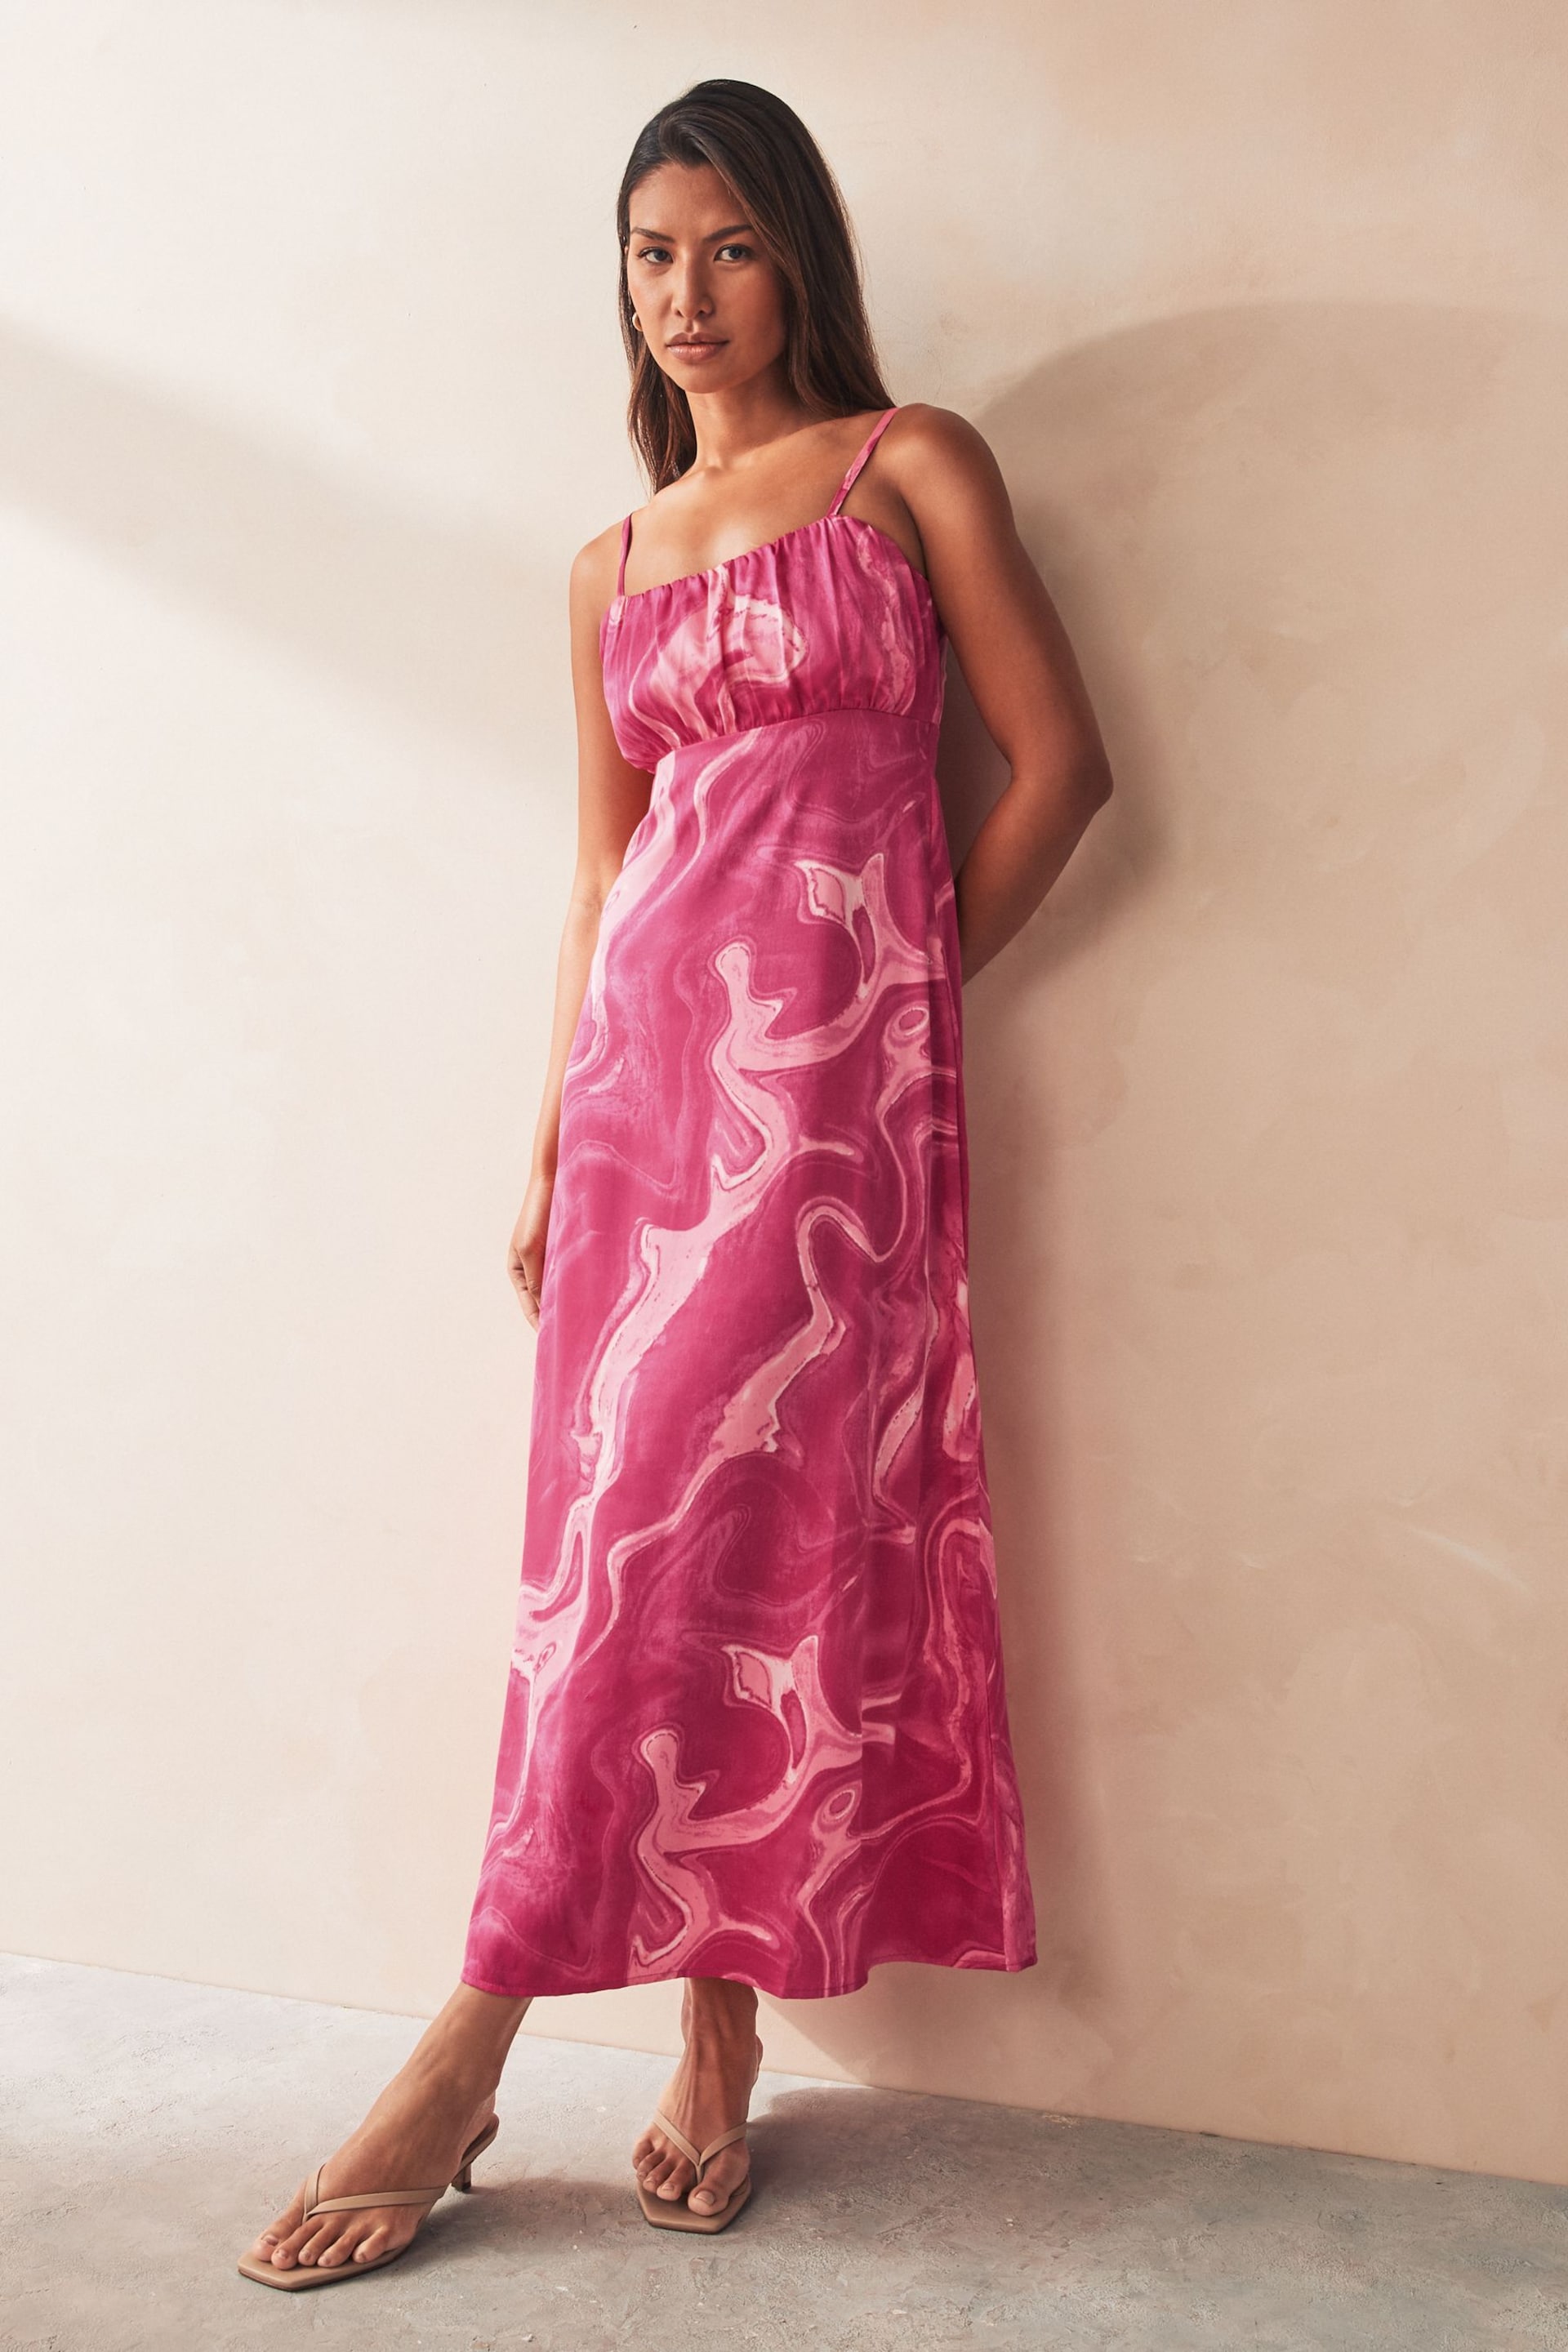 ONLY Pink Marble Print Cami Ruched Detail Midi Dress - Image 1 of 2